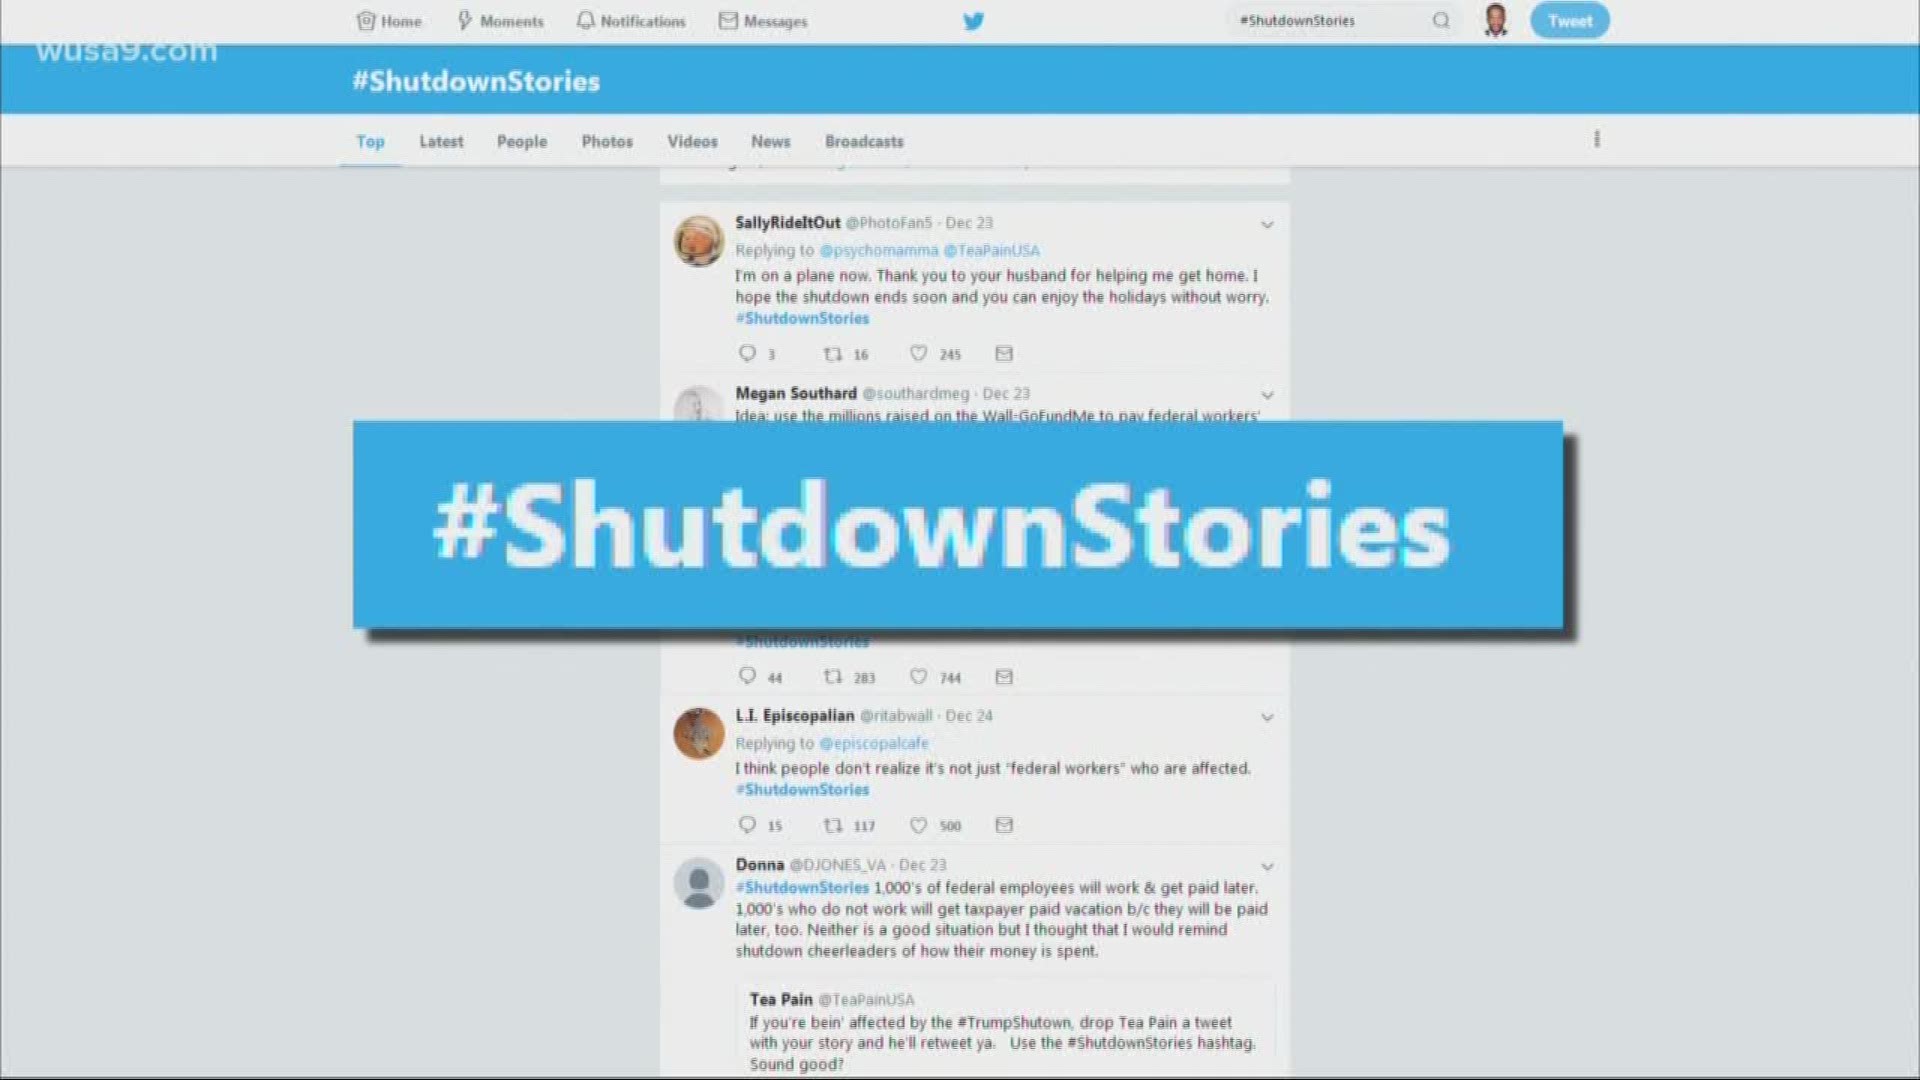 People all across the country are sharing their "Shutdown Stories" on social media as the partial government shutdown prepares to enter its fifth day.